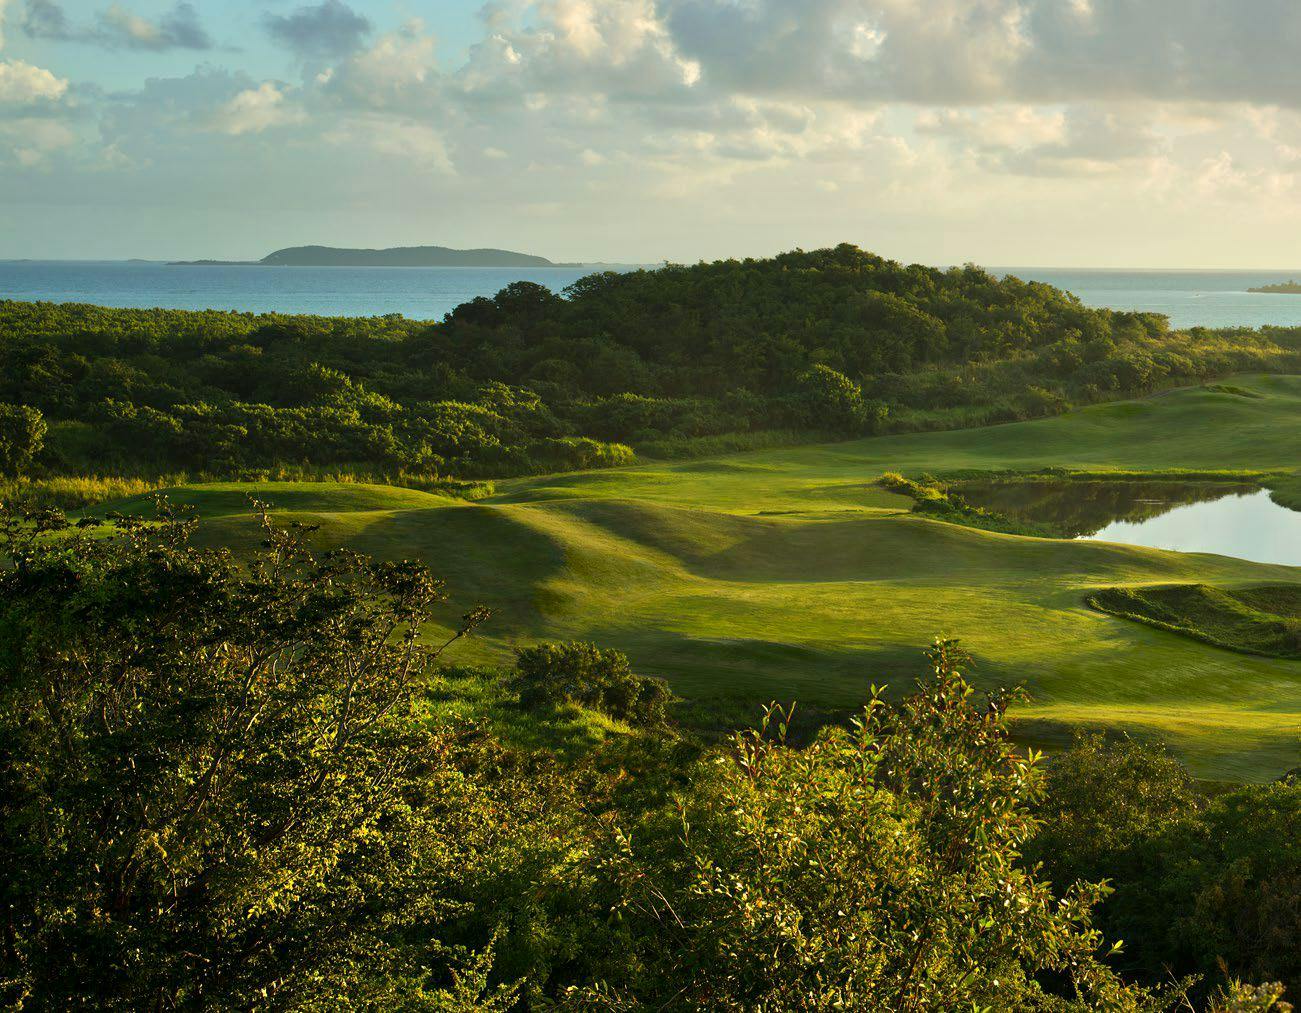 Four Seasons Resort Hotel and Golf Course, located in Puerto Rico